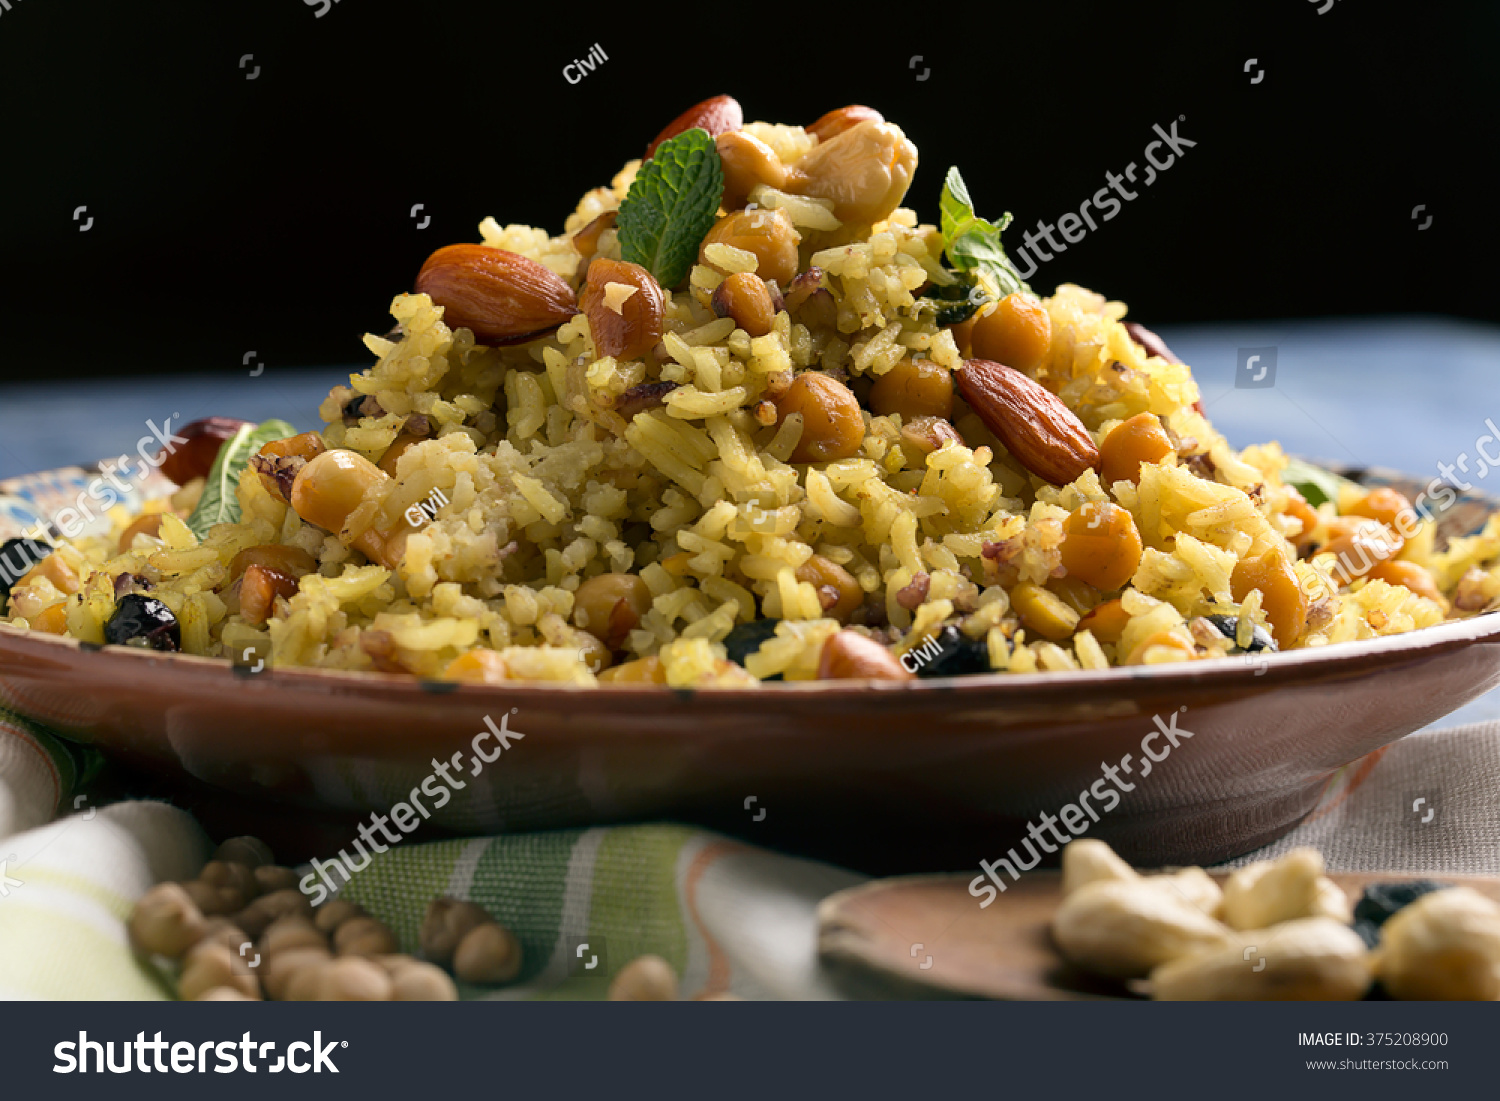 Traditional Middle Eastern or Indian dish of rice (pilaf) cooked with spices #375208900